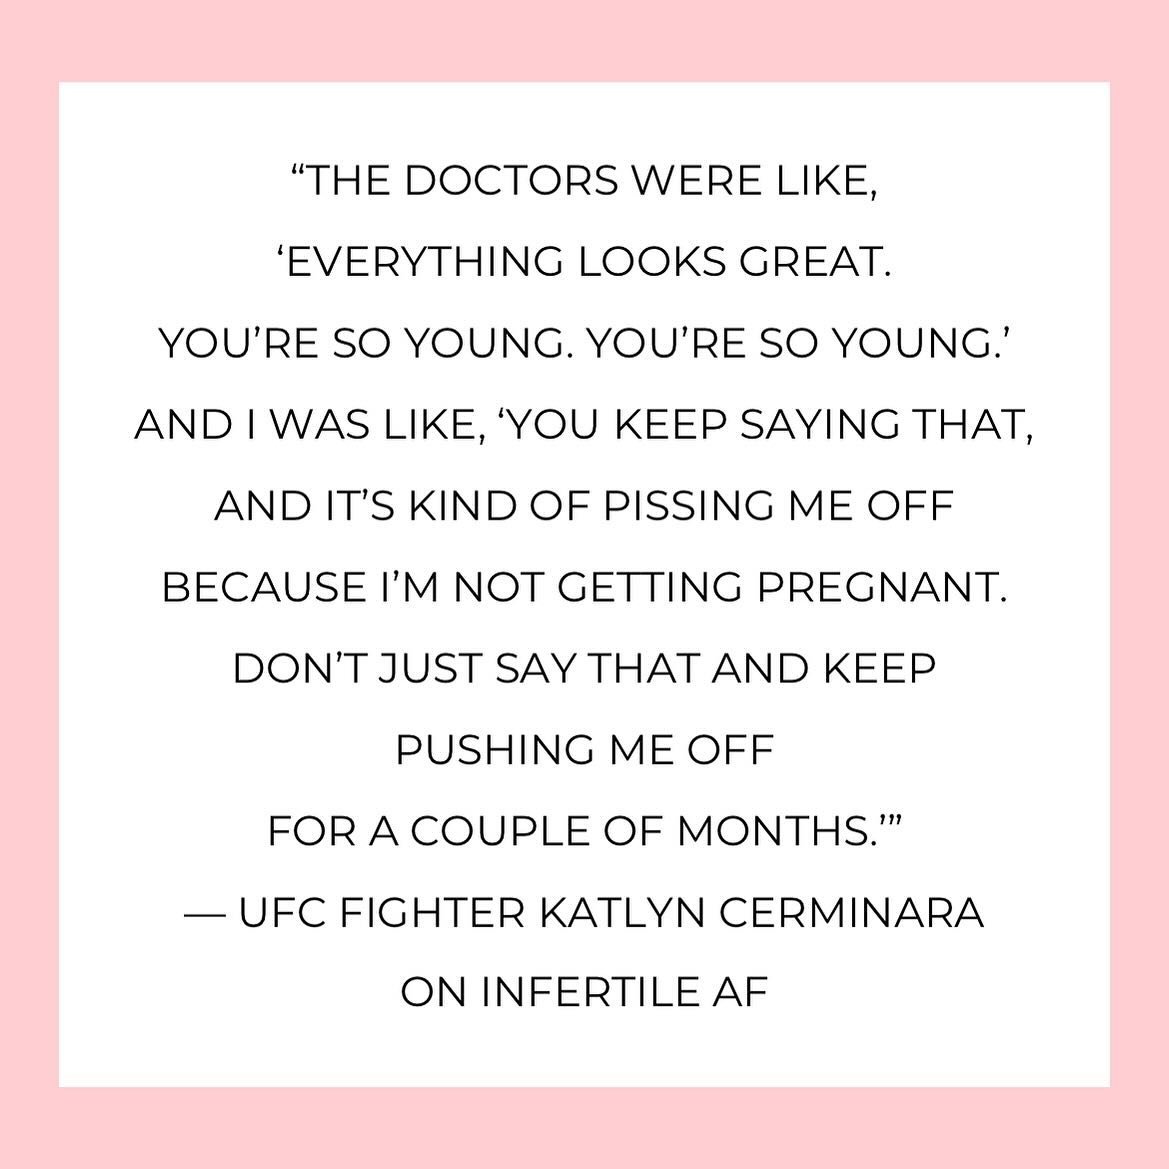 More badass quotes from UFC Fighter Katlyn Cerminara&rsquo;s episode of Infertile AF. @blondefighter 

Have you ever felt not seen or heard during your infertility journey? Pushed off? Ignored? We get it and we see you. ❤️

Katlyn did &mdash; and she